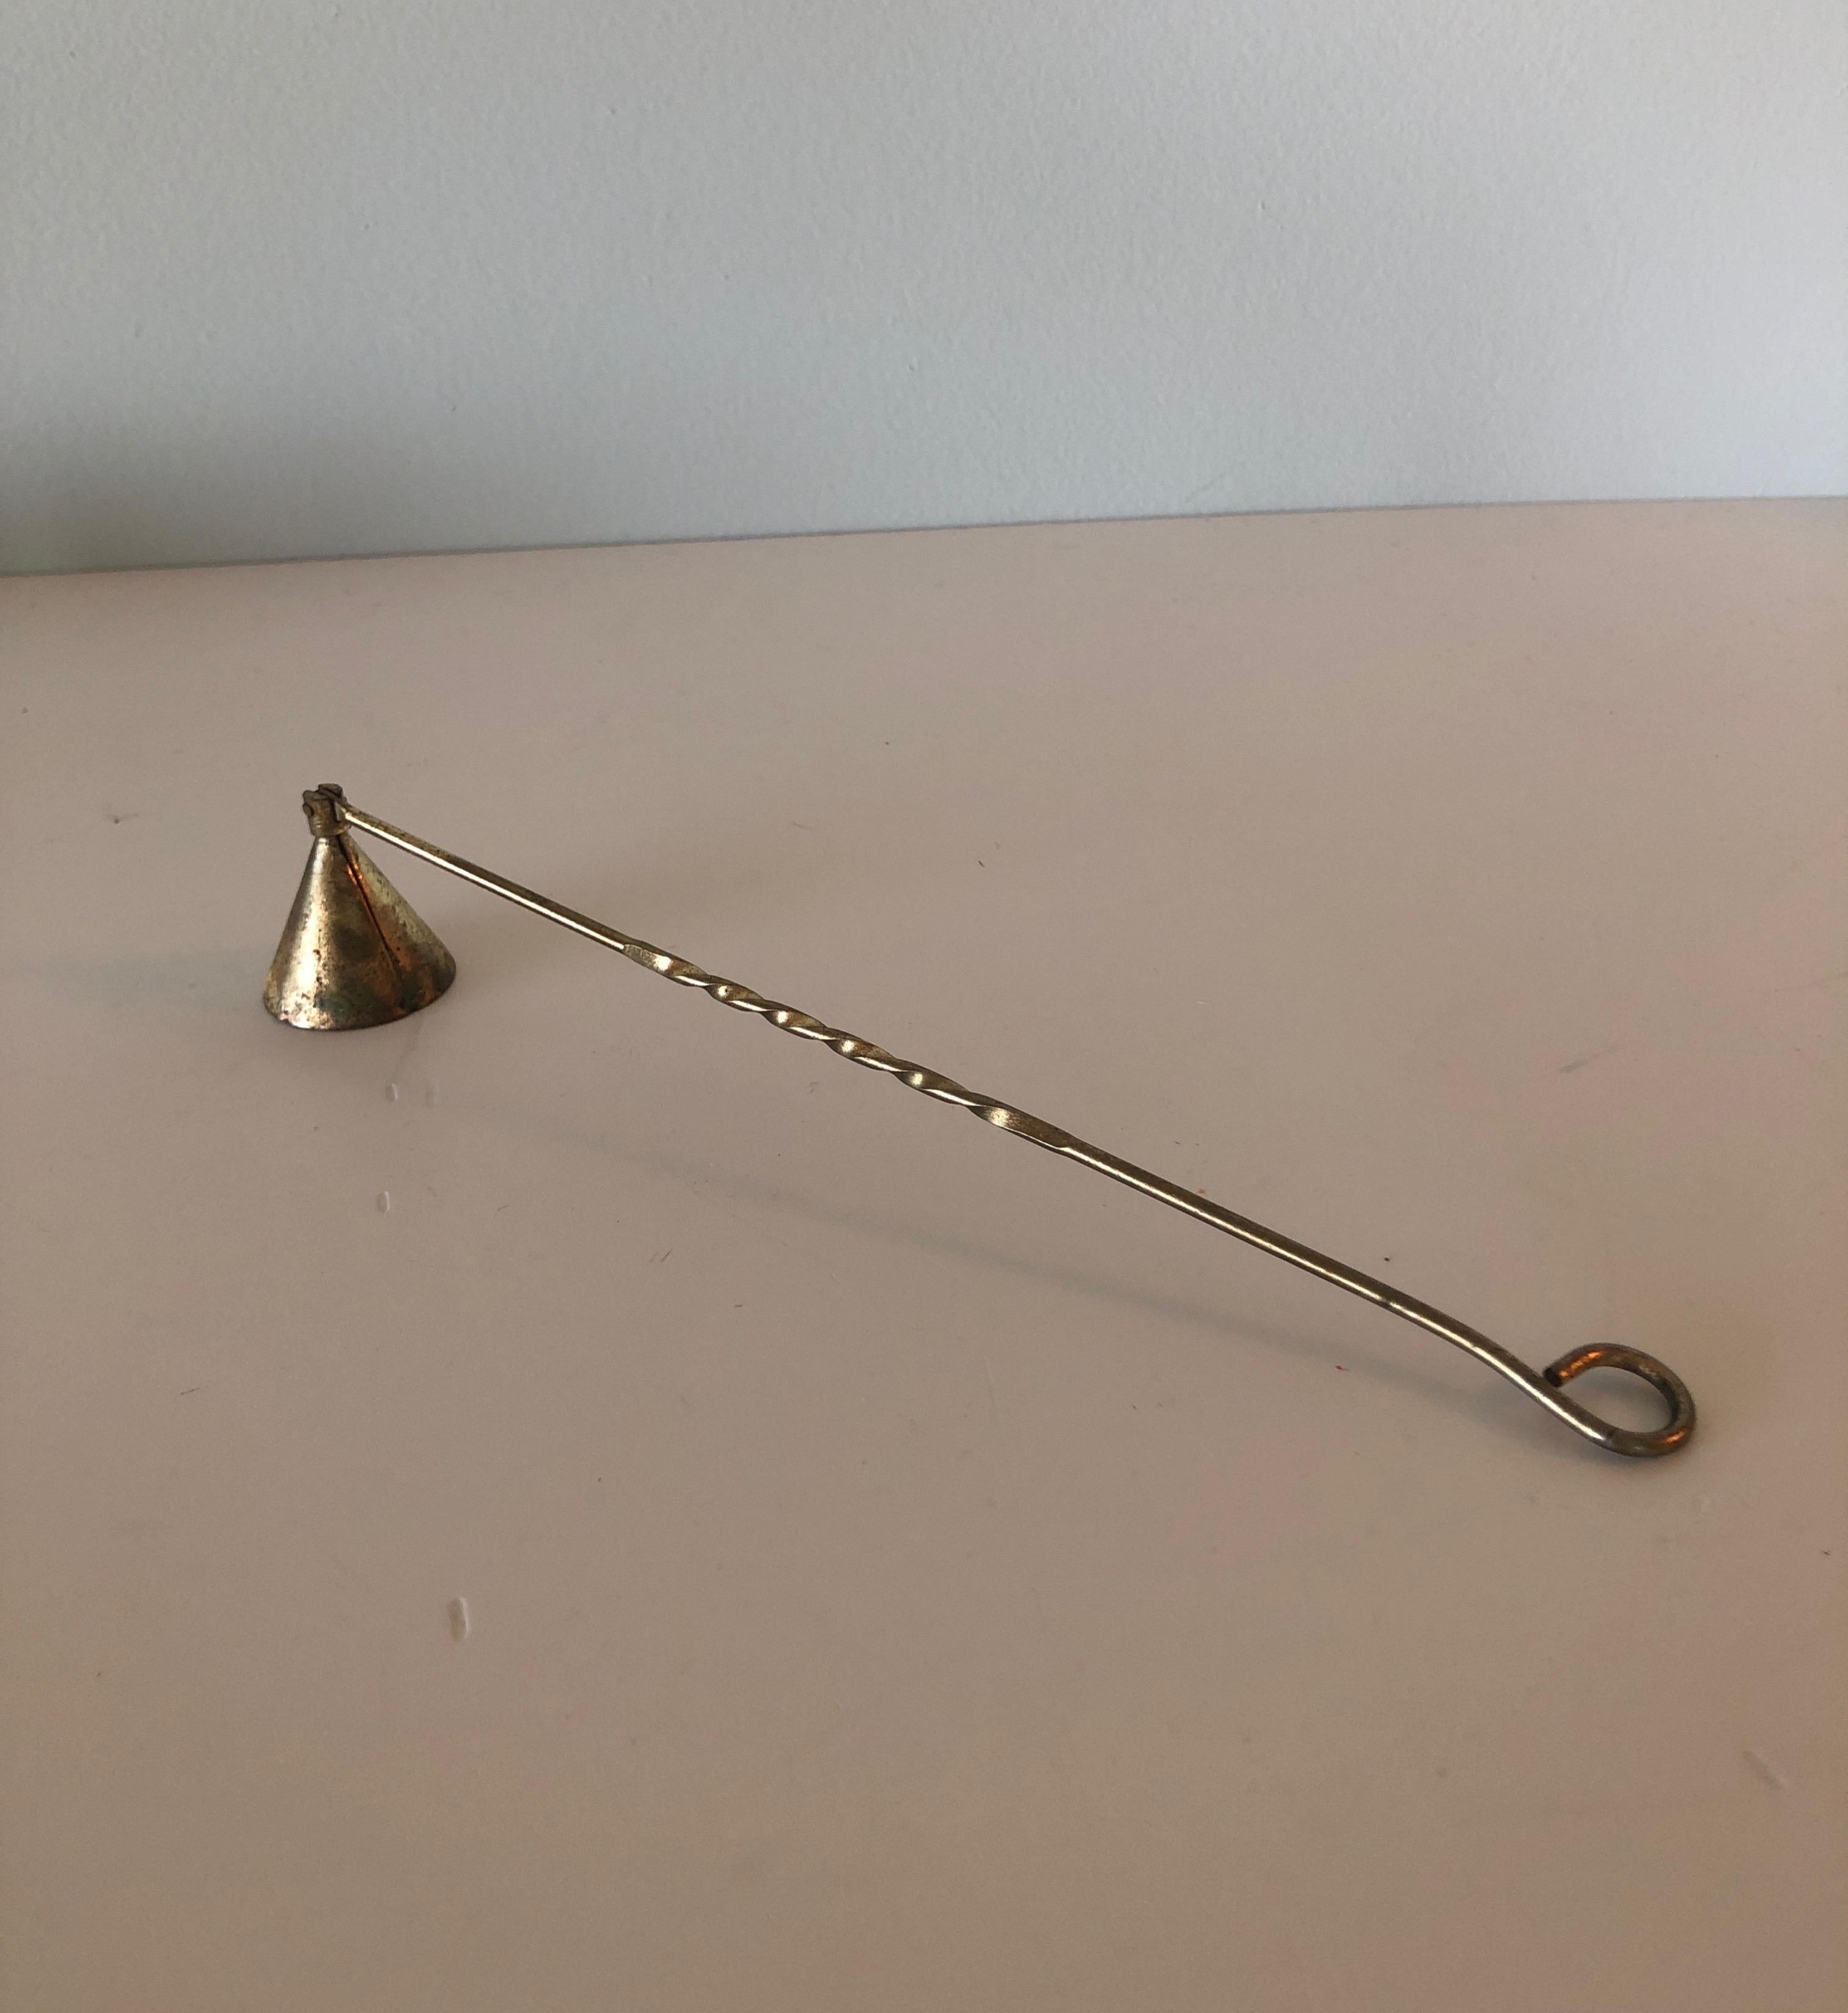 Vintage brass articulate candle snuffer with twisted handle.
Size:10.25